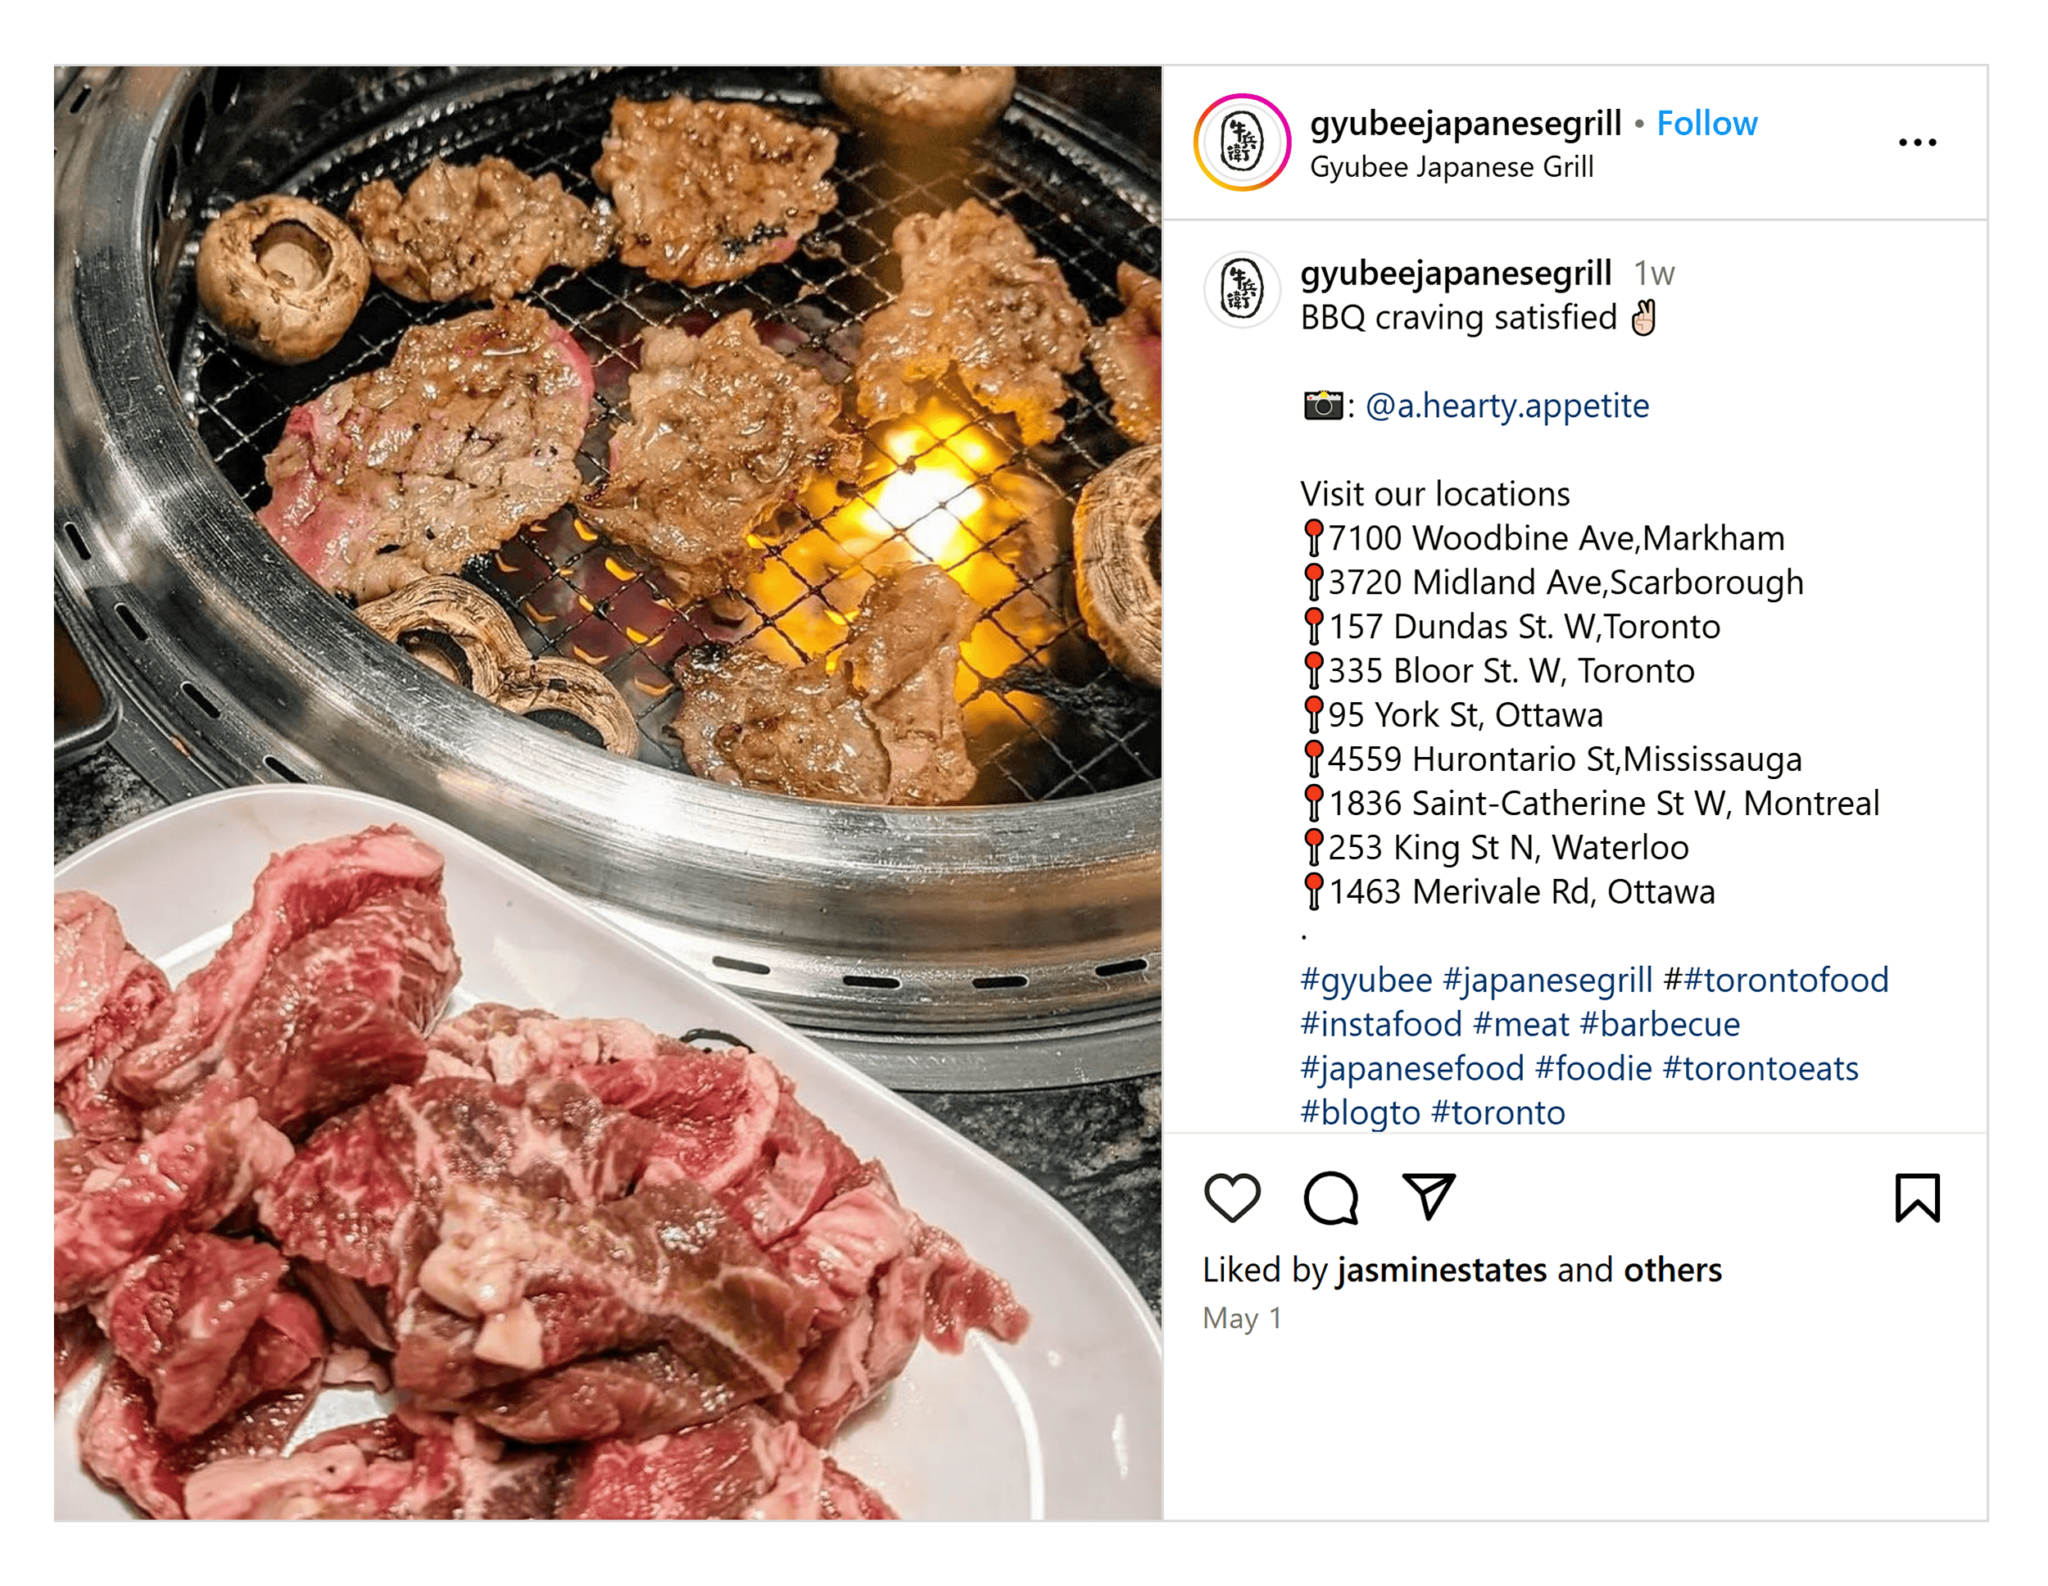 gyubee-japanese-grill-instagram Small Business Marketing: 6 Proven Strategies for More Reach